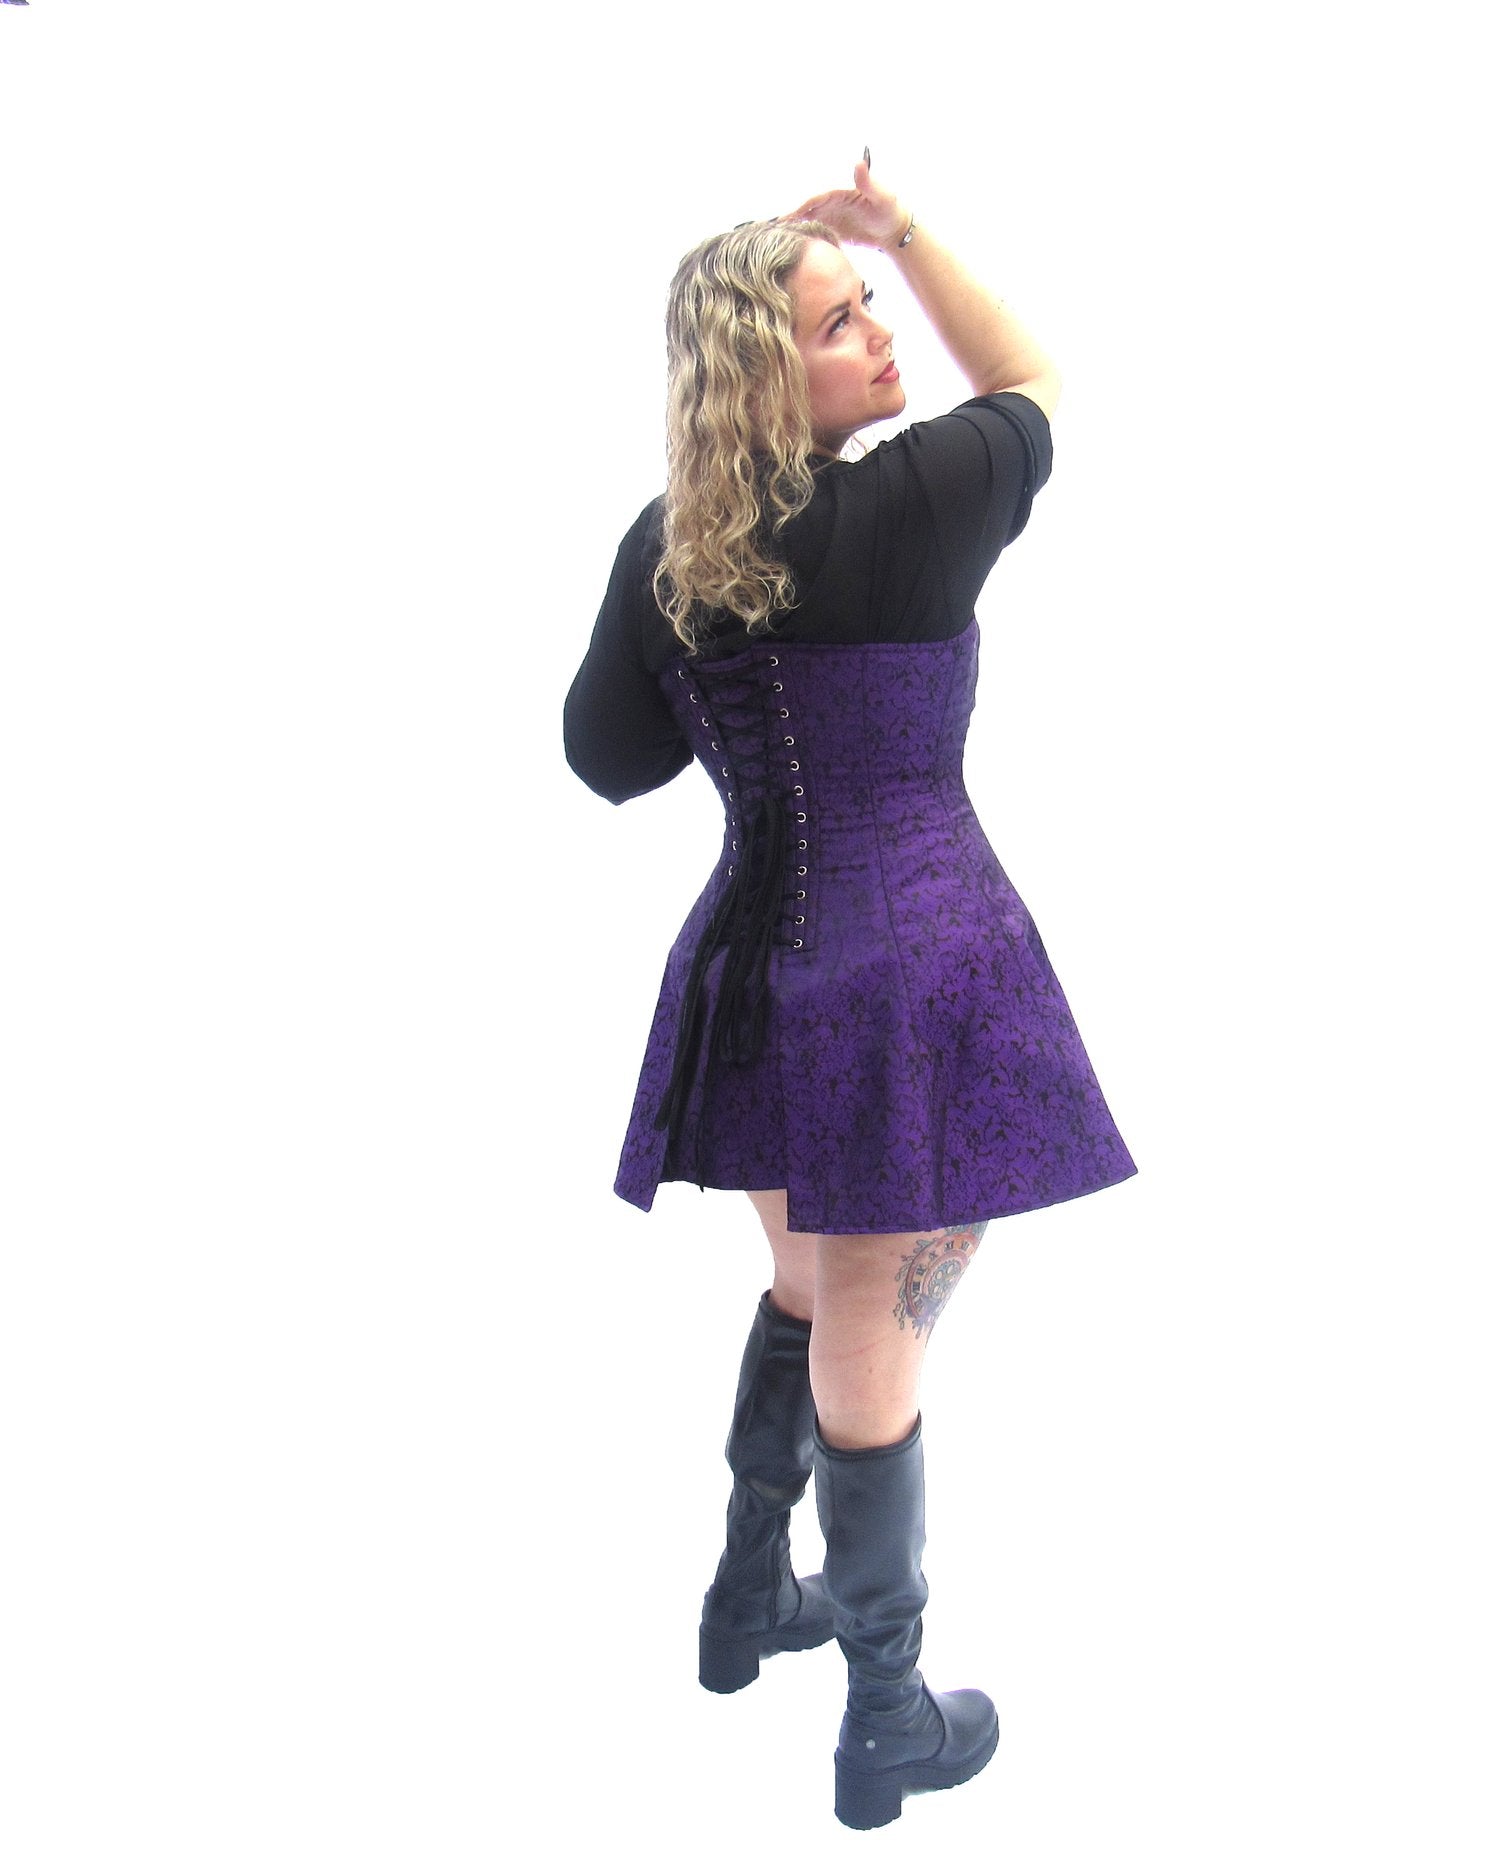 A model wearing the purple brocade Skirted Overbust Corset, rear view.